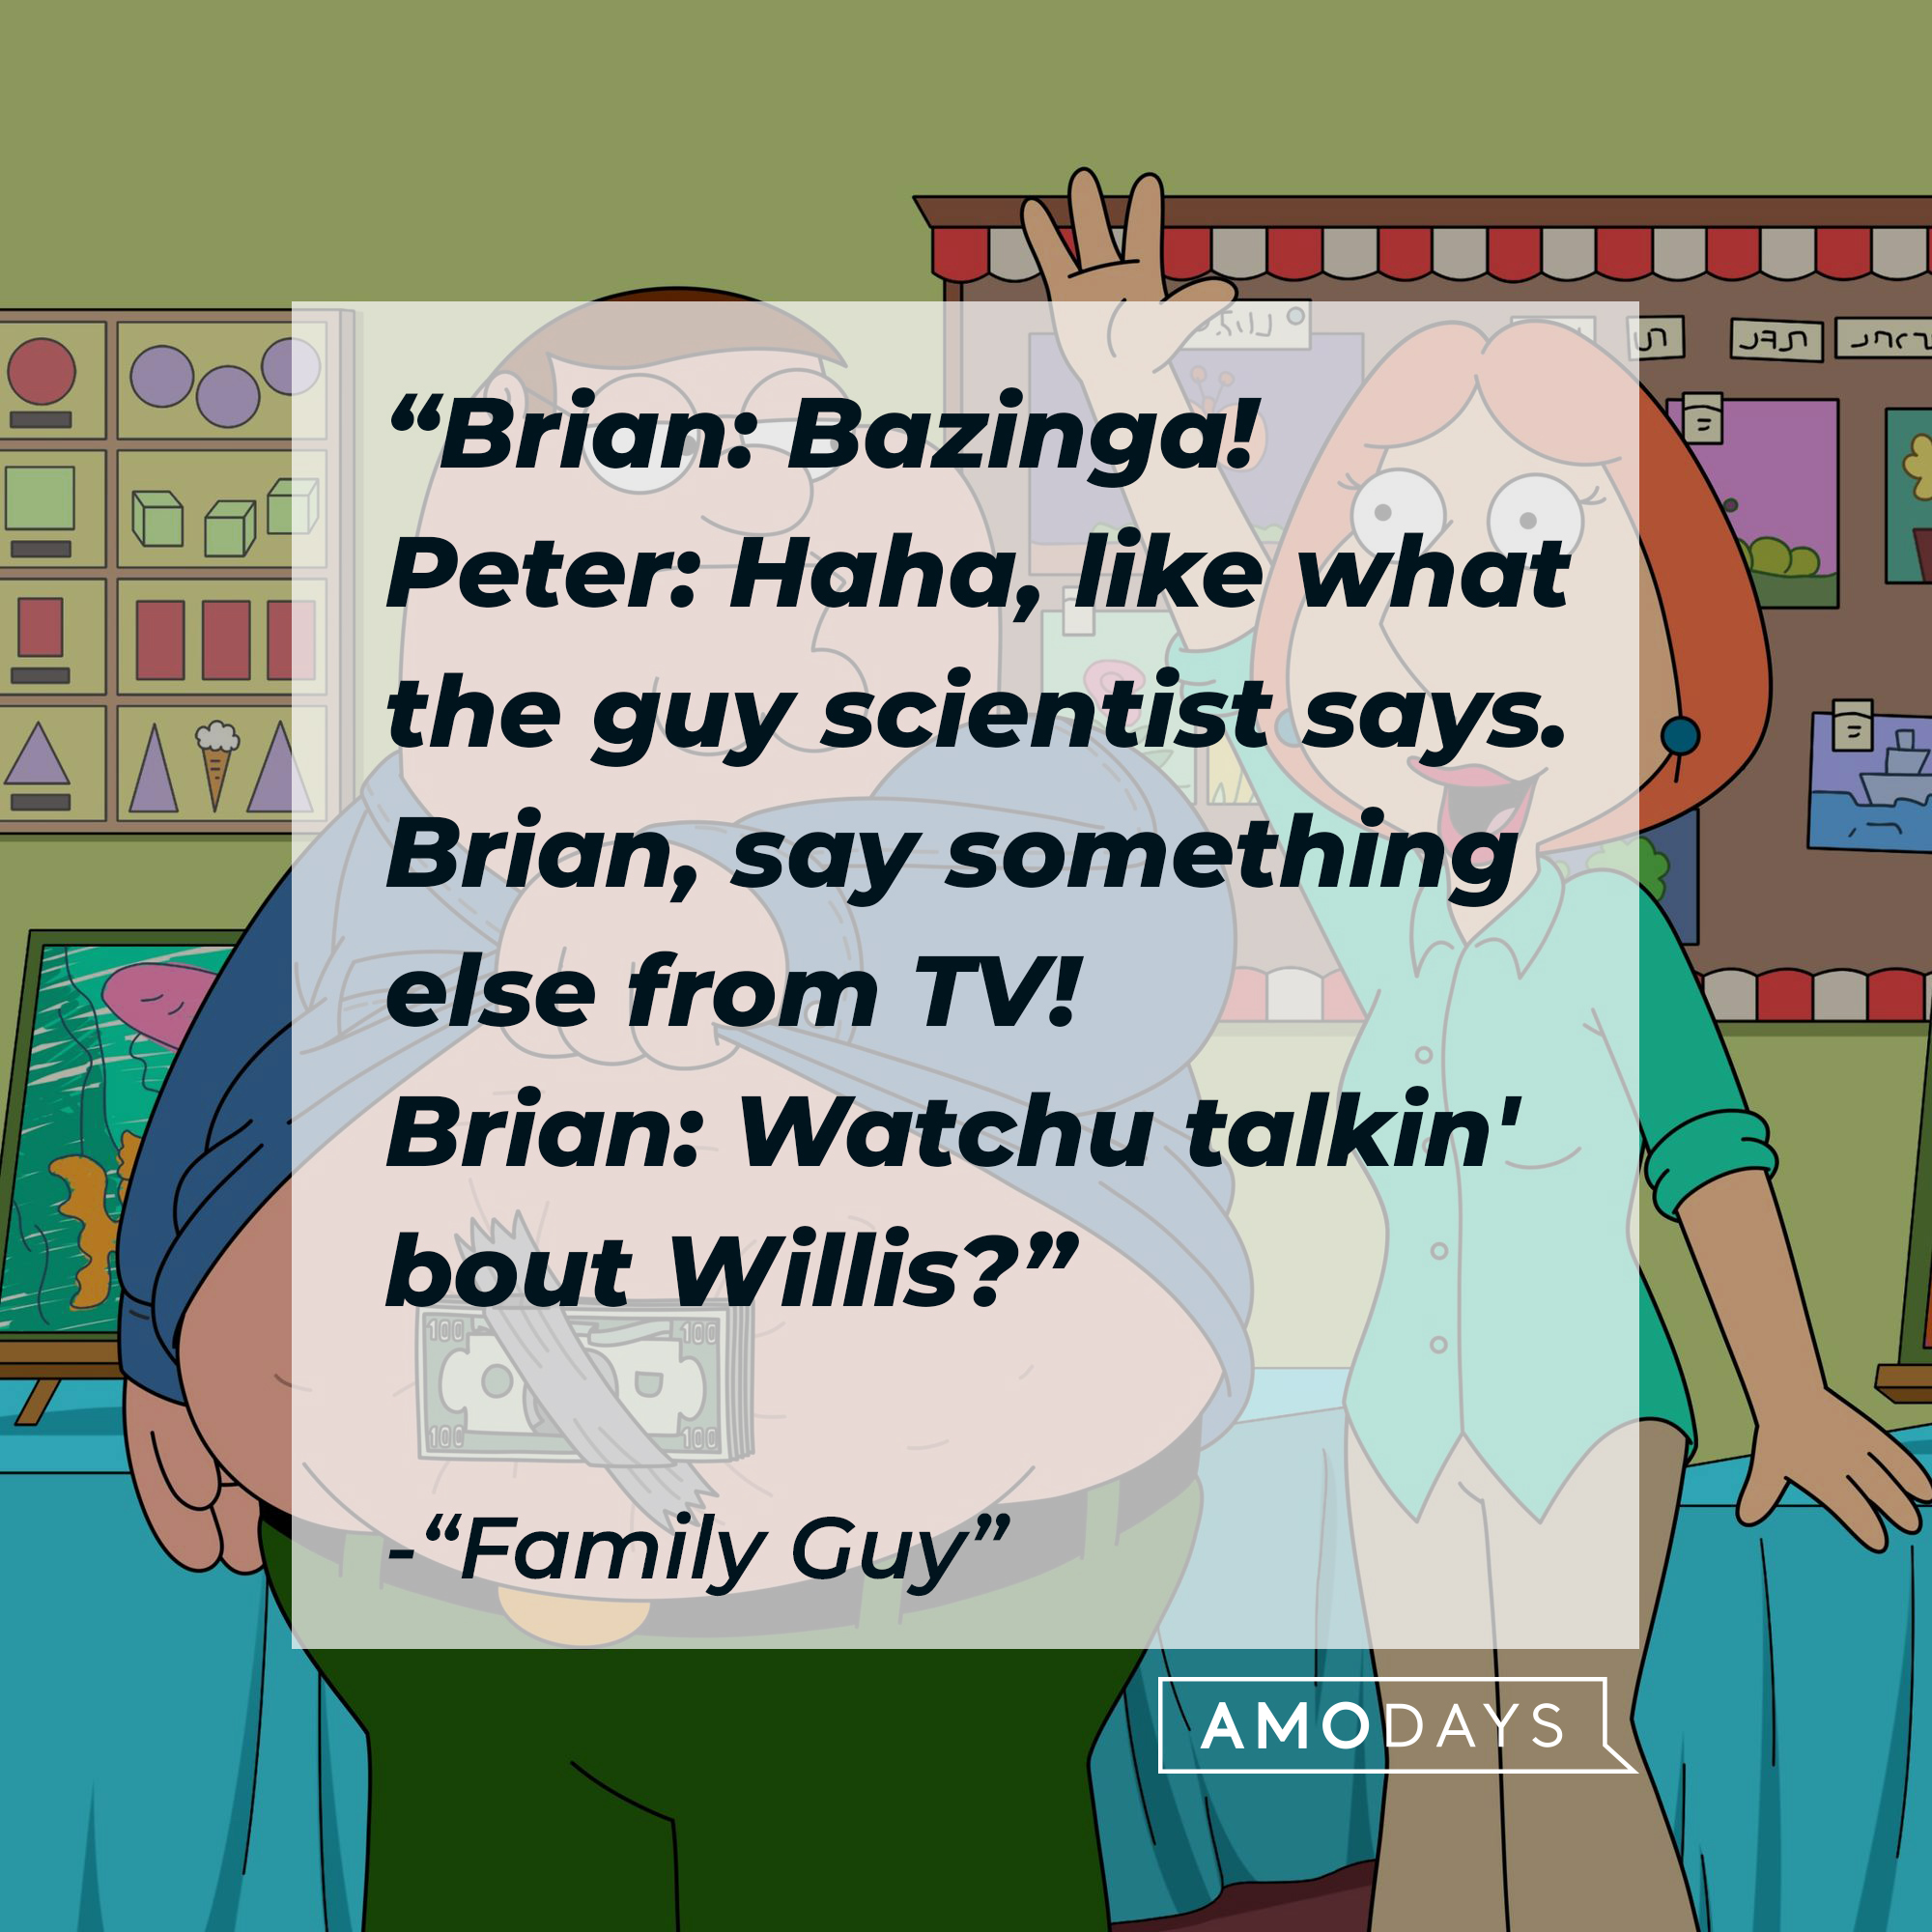 Peter and Lois Griffin with the dialogue: “Brian: Bazinga! ; Peter: Haha, like what the guy scientist says. ; Brian, say something else from TV! ; Brian: Watchu talkin' bout Willis?" | Source: Facebook.com/FamilyGuy